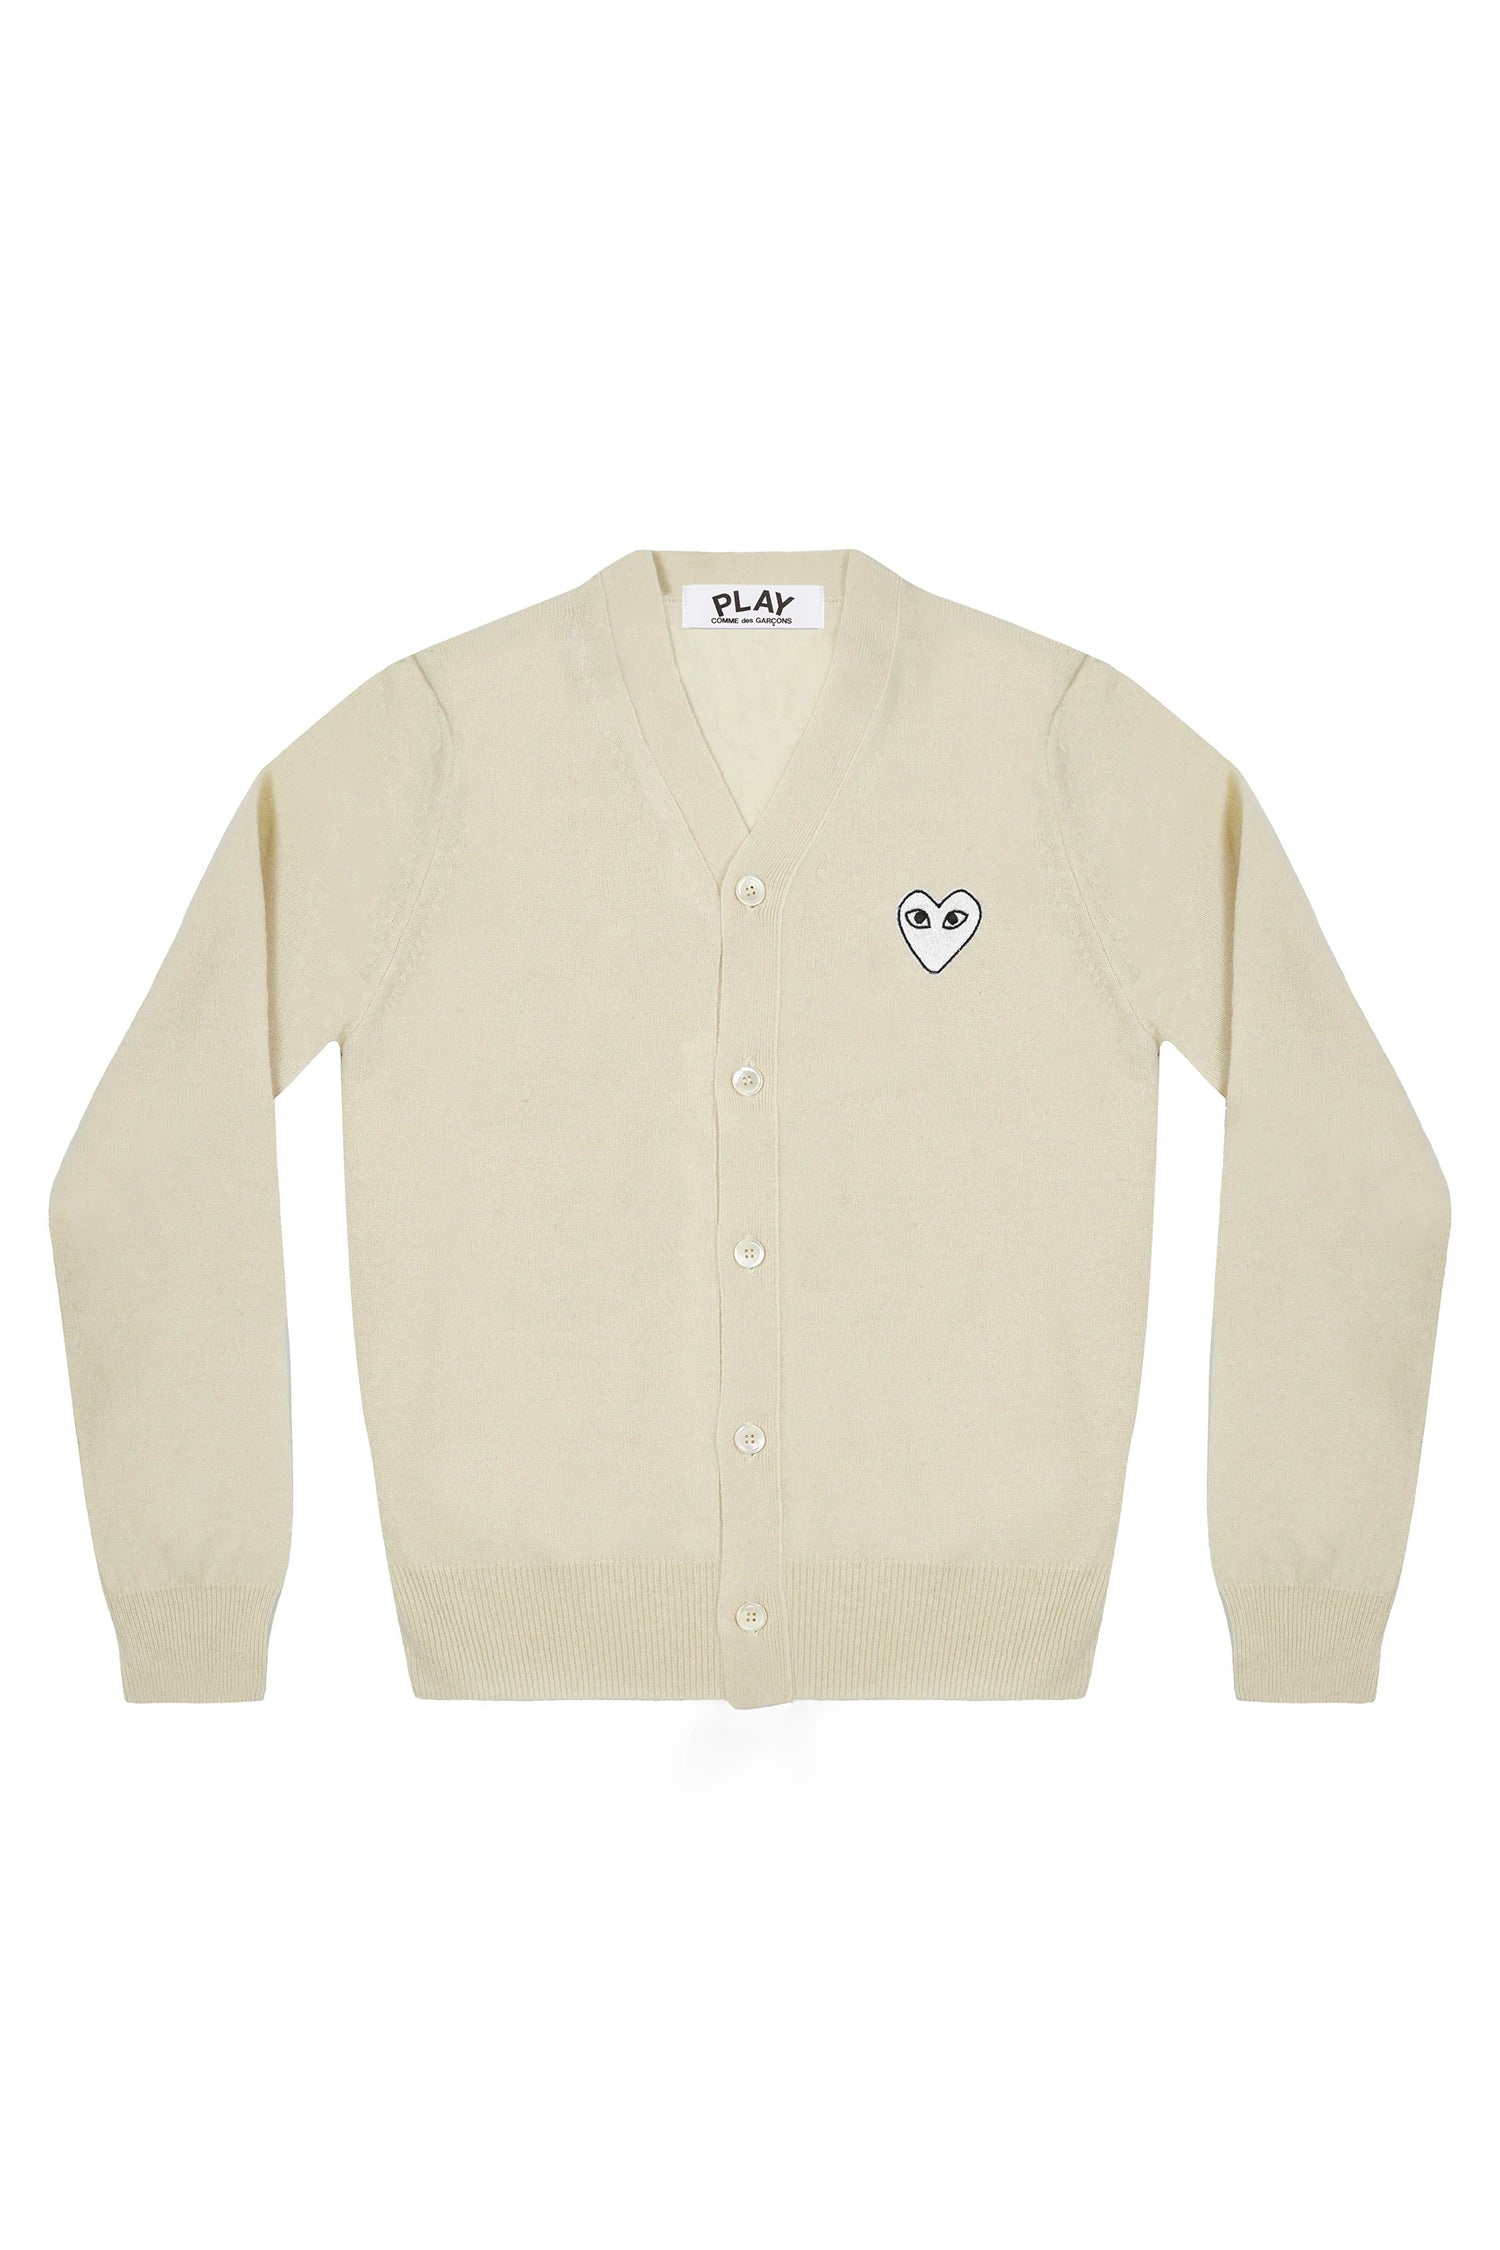 WHITE HEART MENS CARDIGAN IN NATURAL, FW22